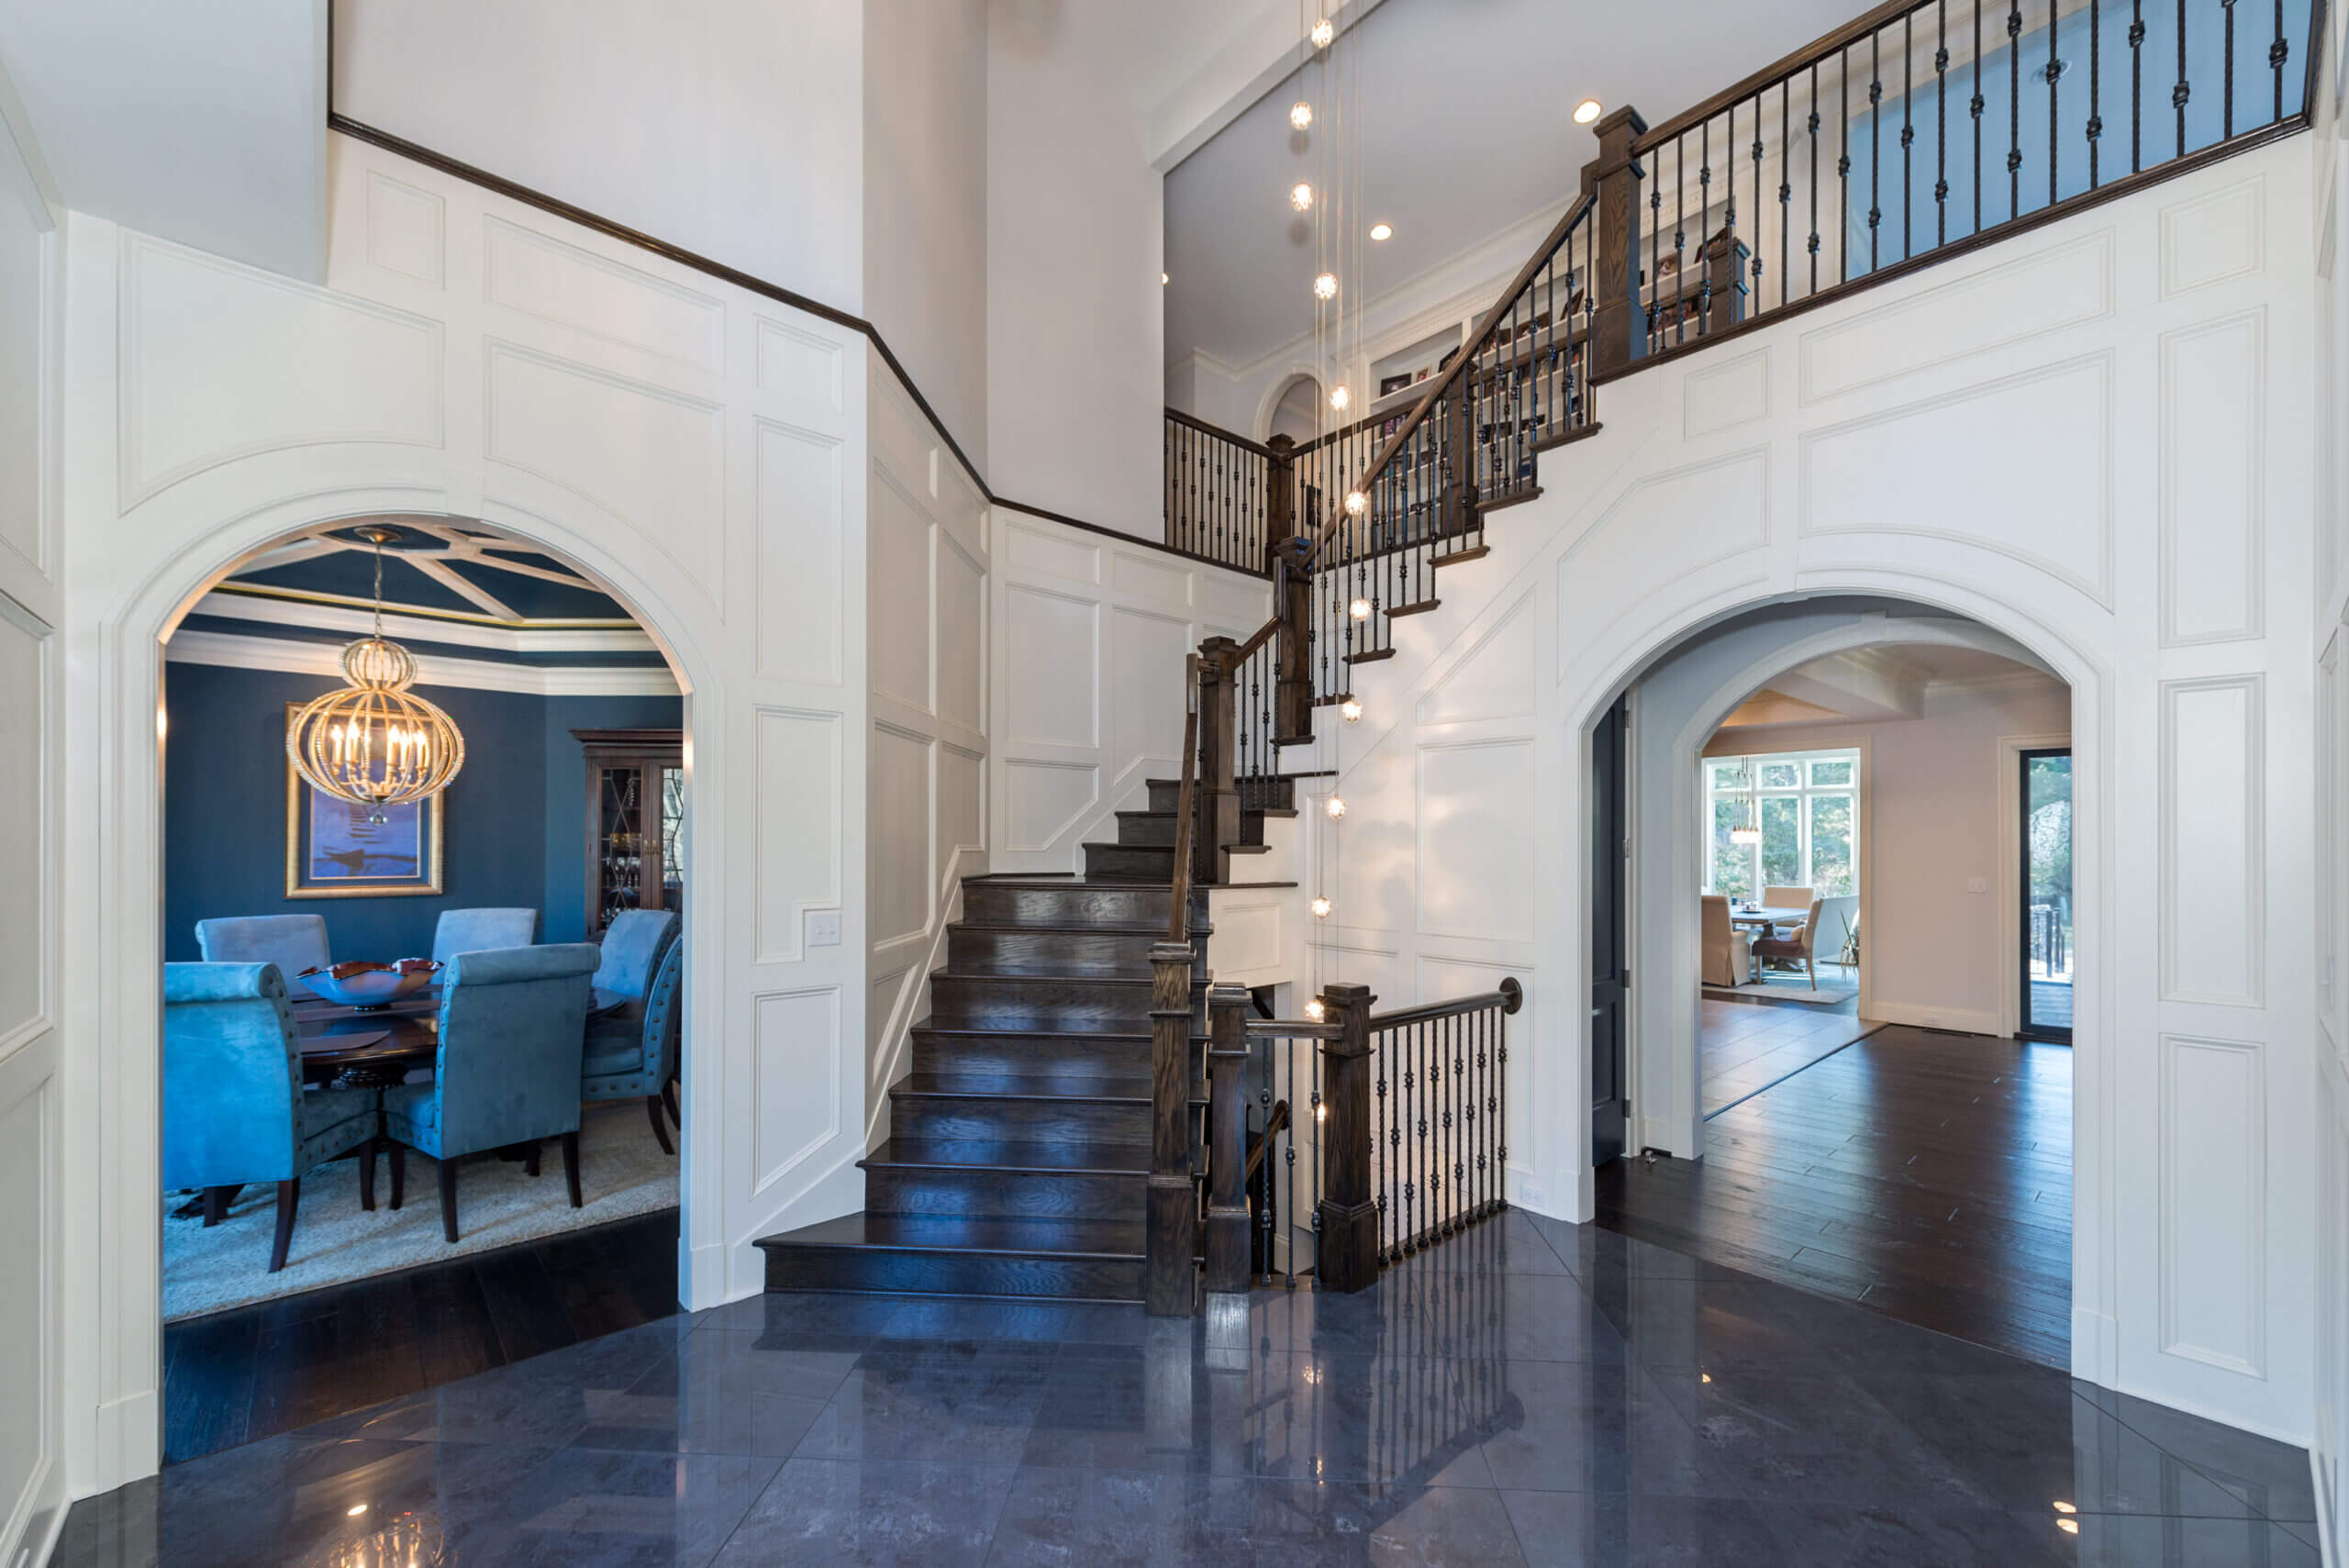 Hallway with grand staircase of a home